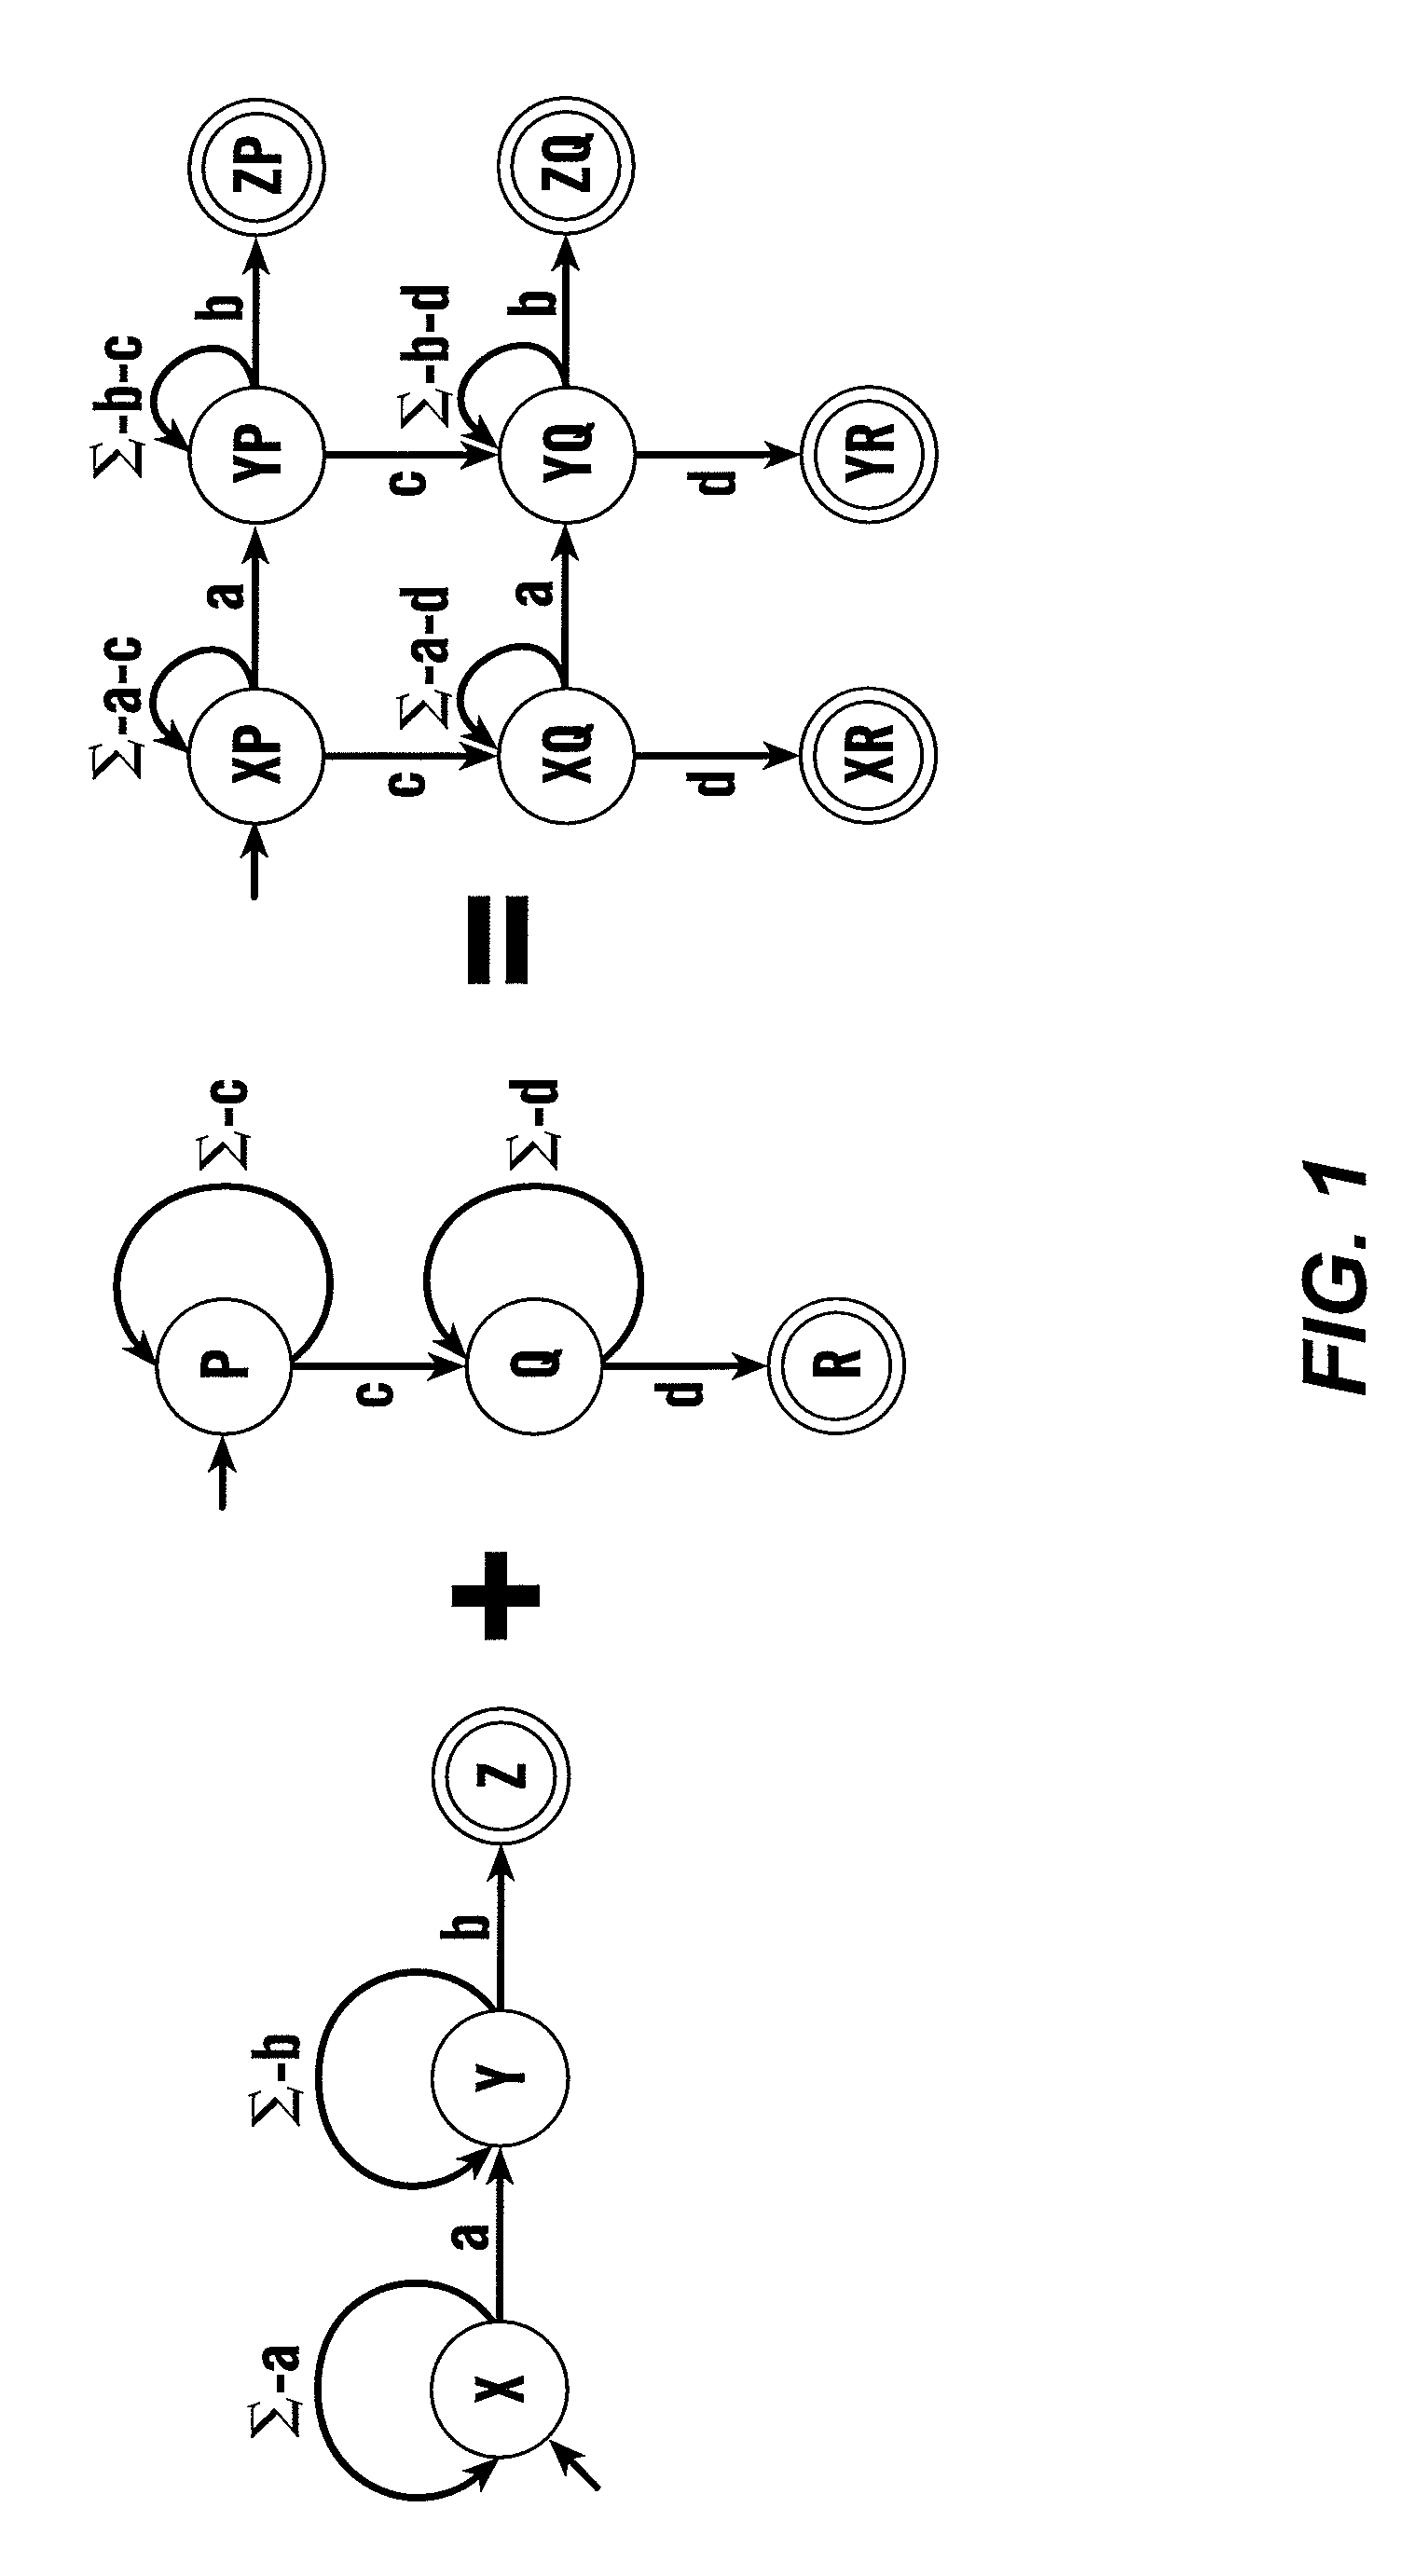 Extended finite state automata and systems and methods for recognizing patterns using extended finite state automata